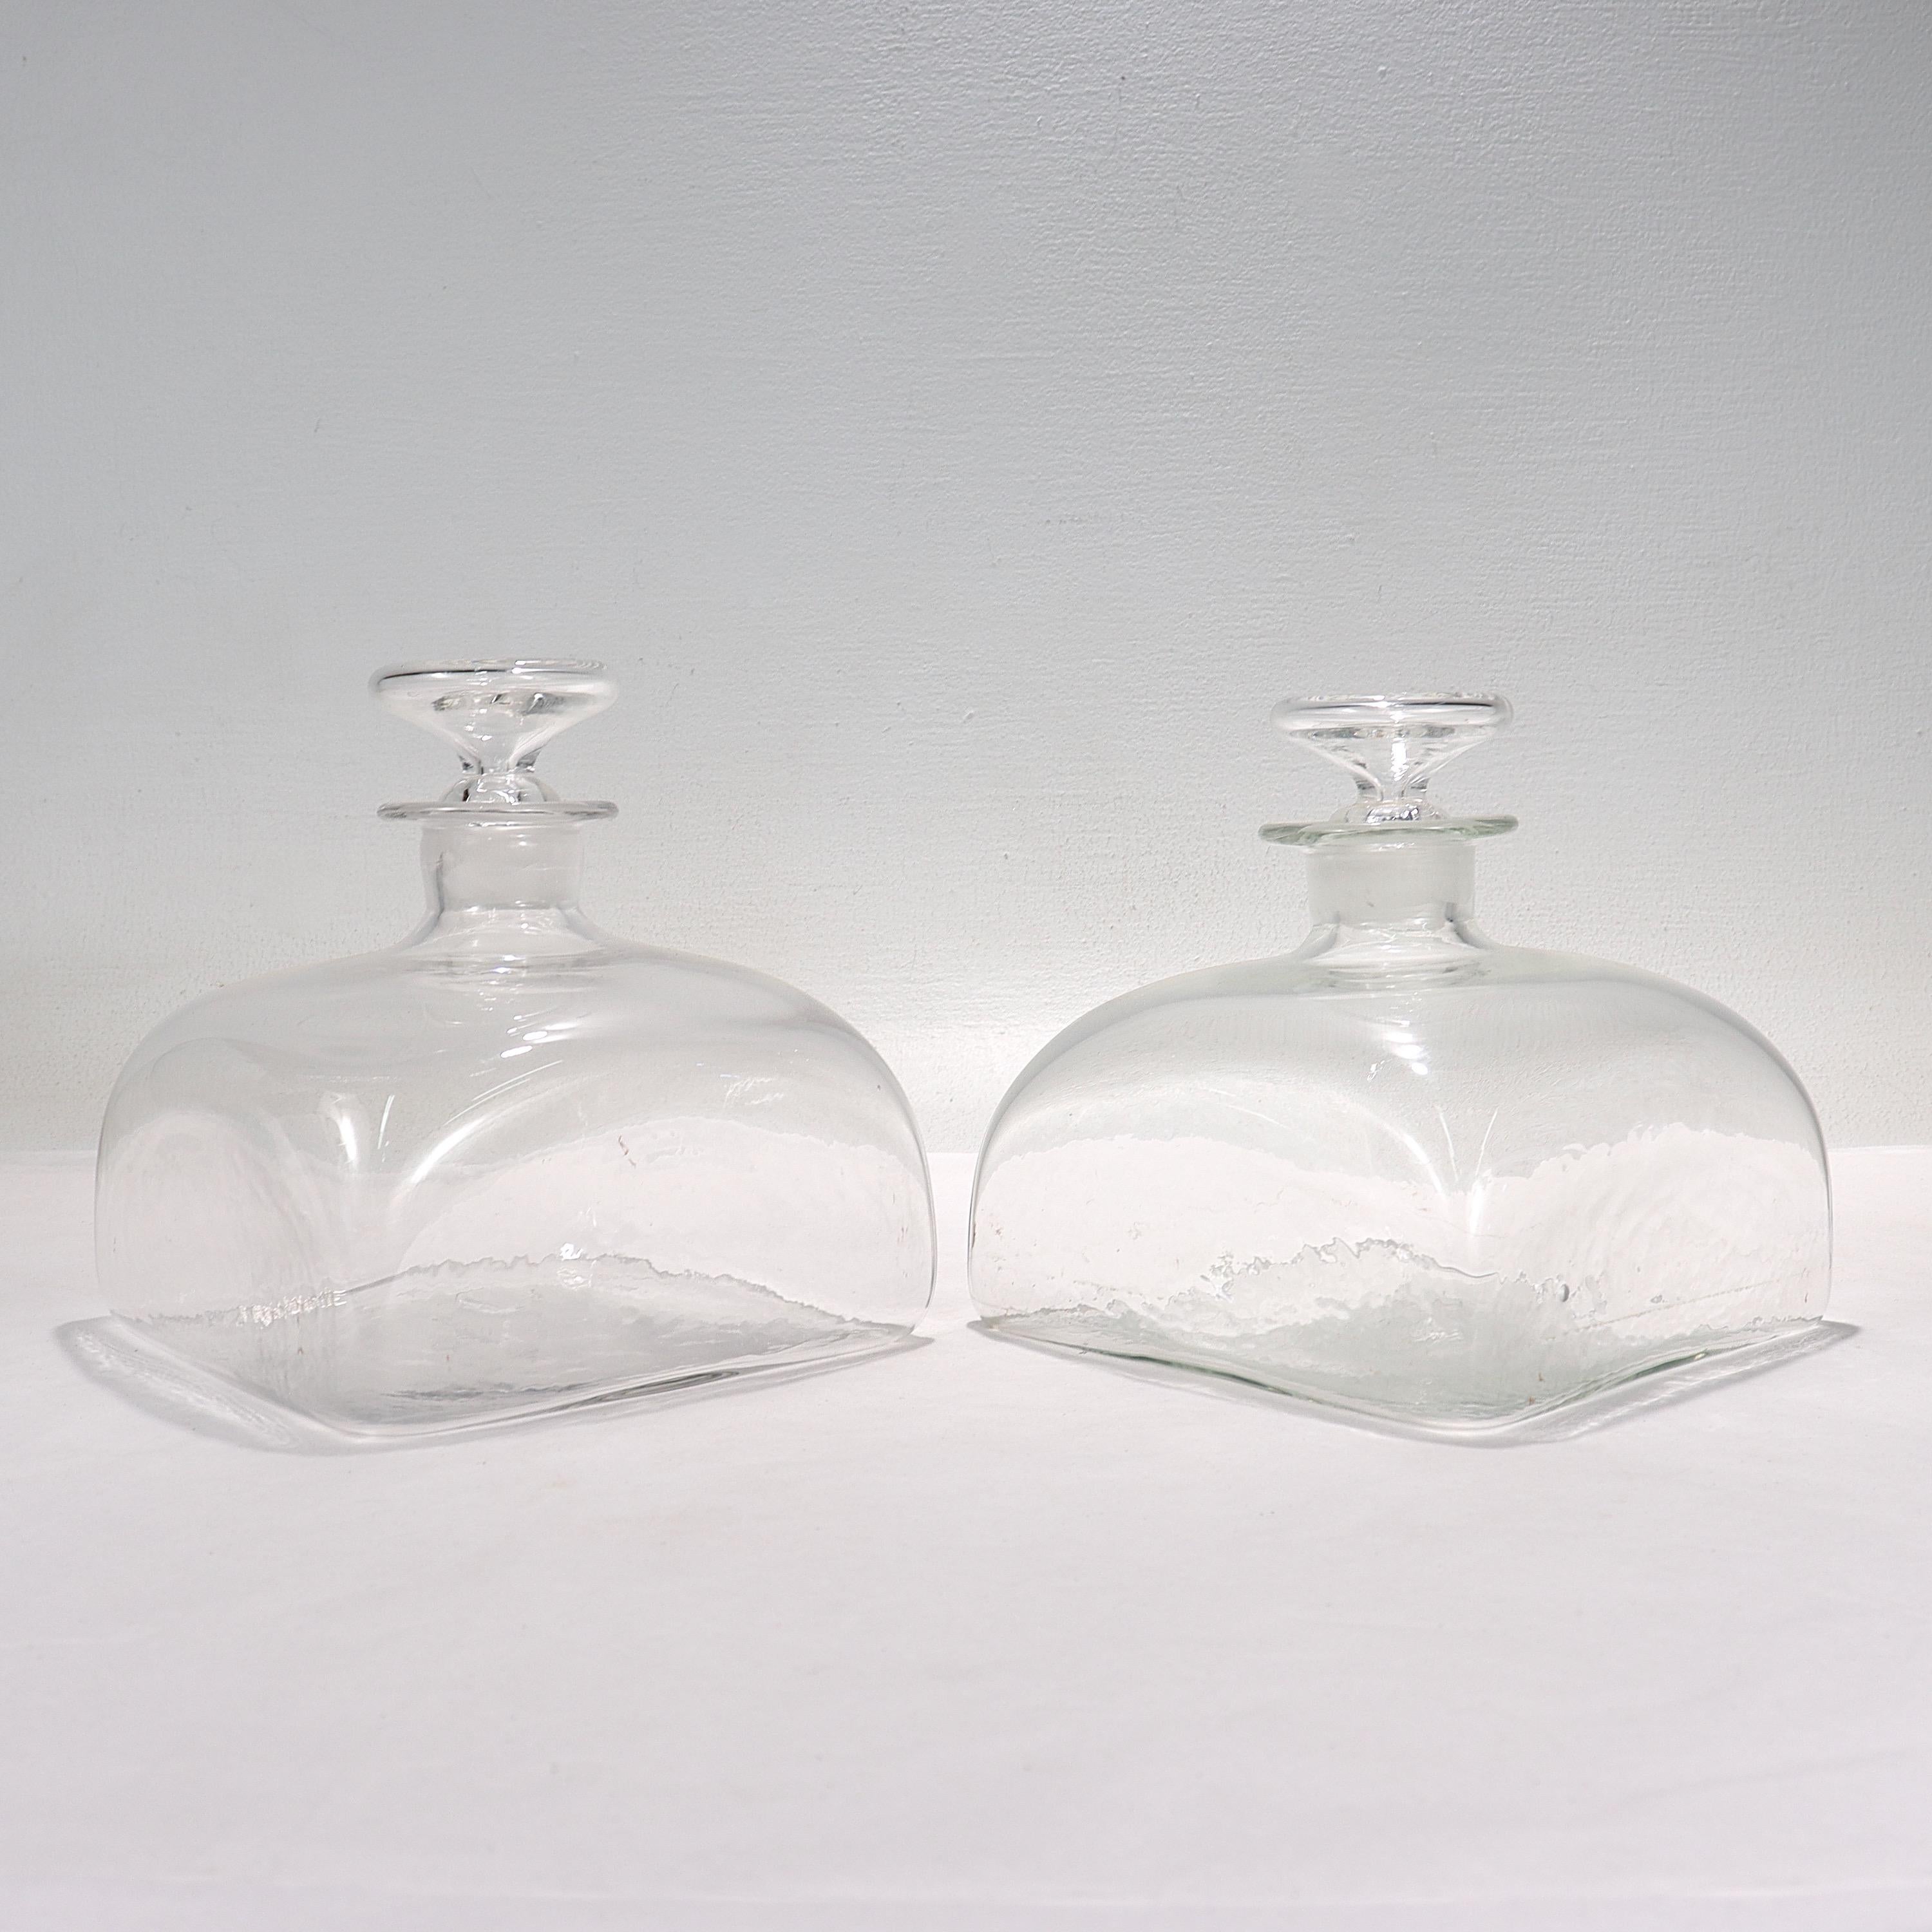 A fine pair of antique glass ship decanters.

Each with a square base and stoppers with circular knob handles.

Each has a polished pontil mark to the base.

Simply a great pair of glass decanters!

Date:
early 20th century or